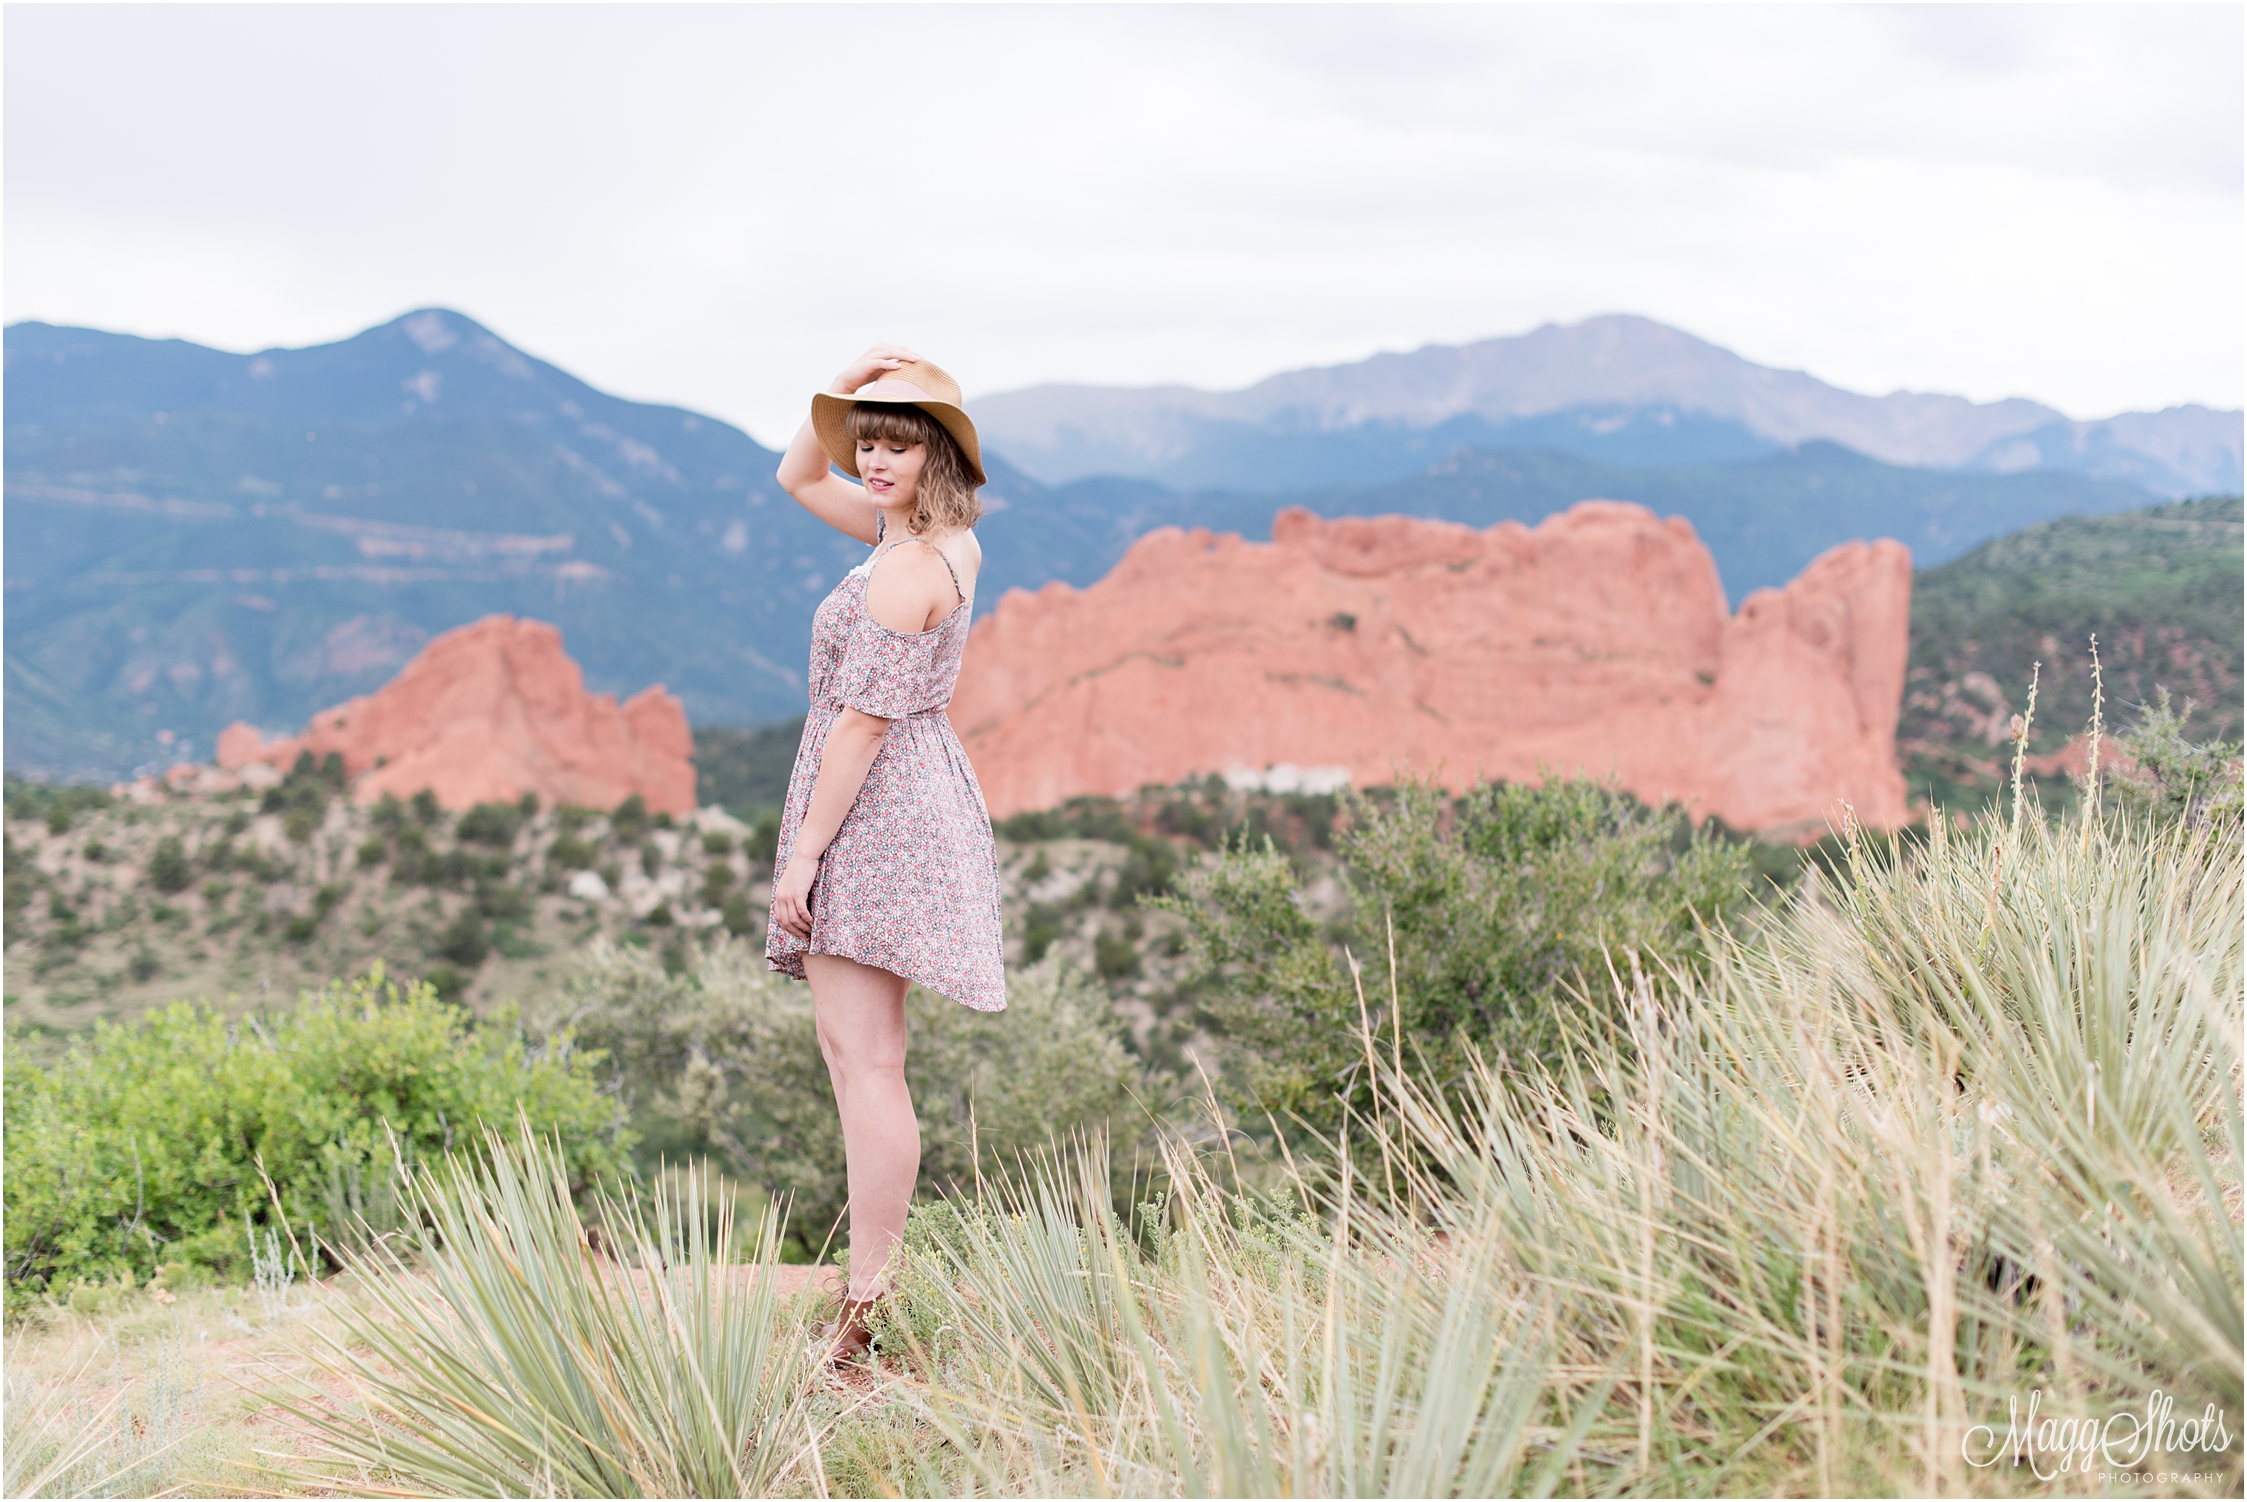 Girl Hat Dress Mountains Outdoors Colorado MaggShots Photography MaggShots Professional Photography Professional Photographer Garden of the Gods